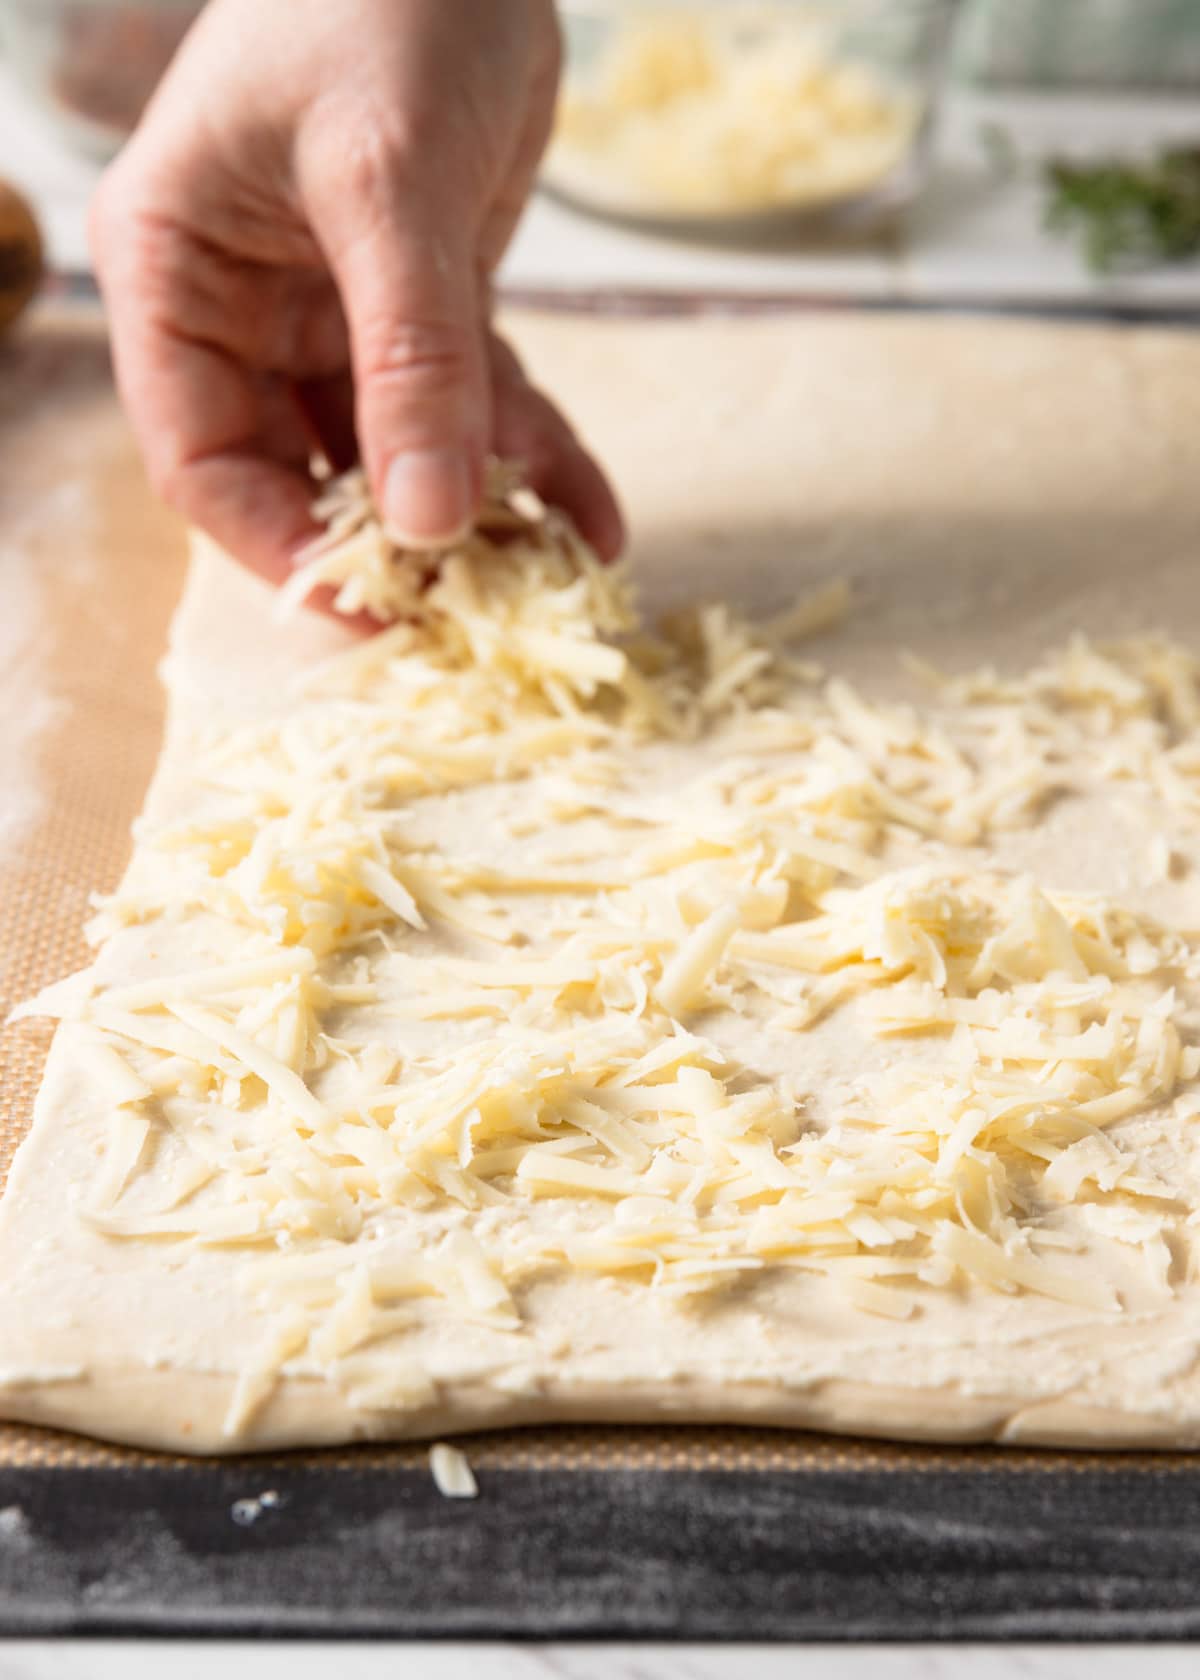 shredded gruyere cheese being sprinkled onto a sheet of puff pastry